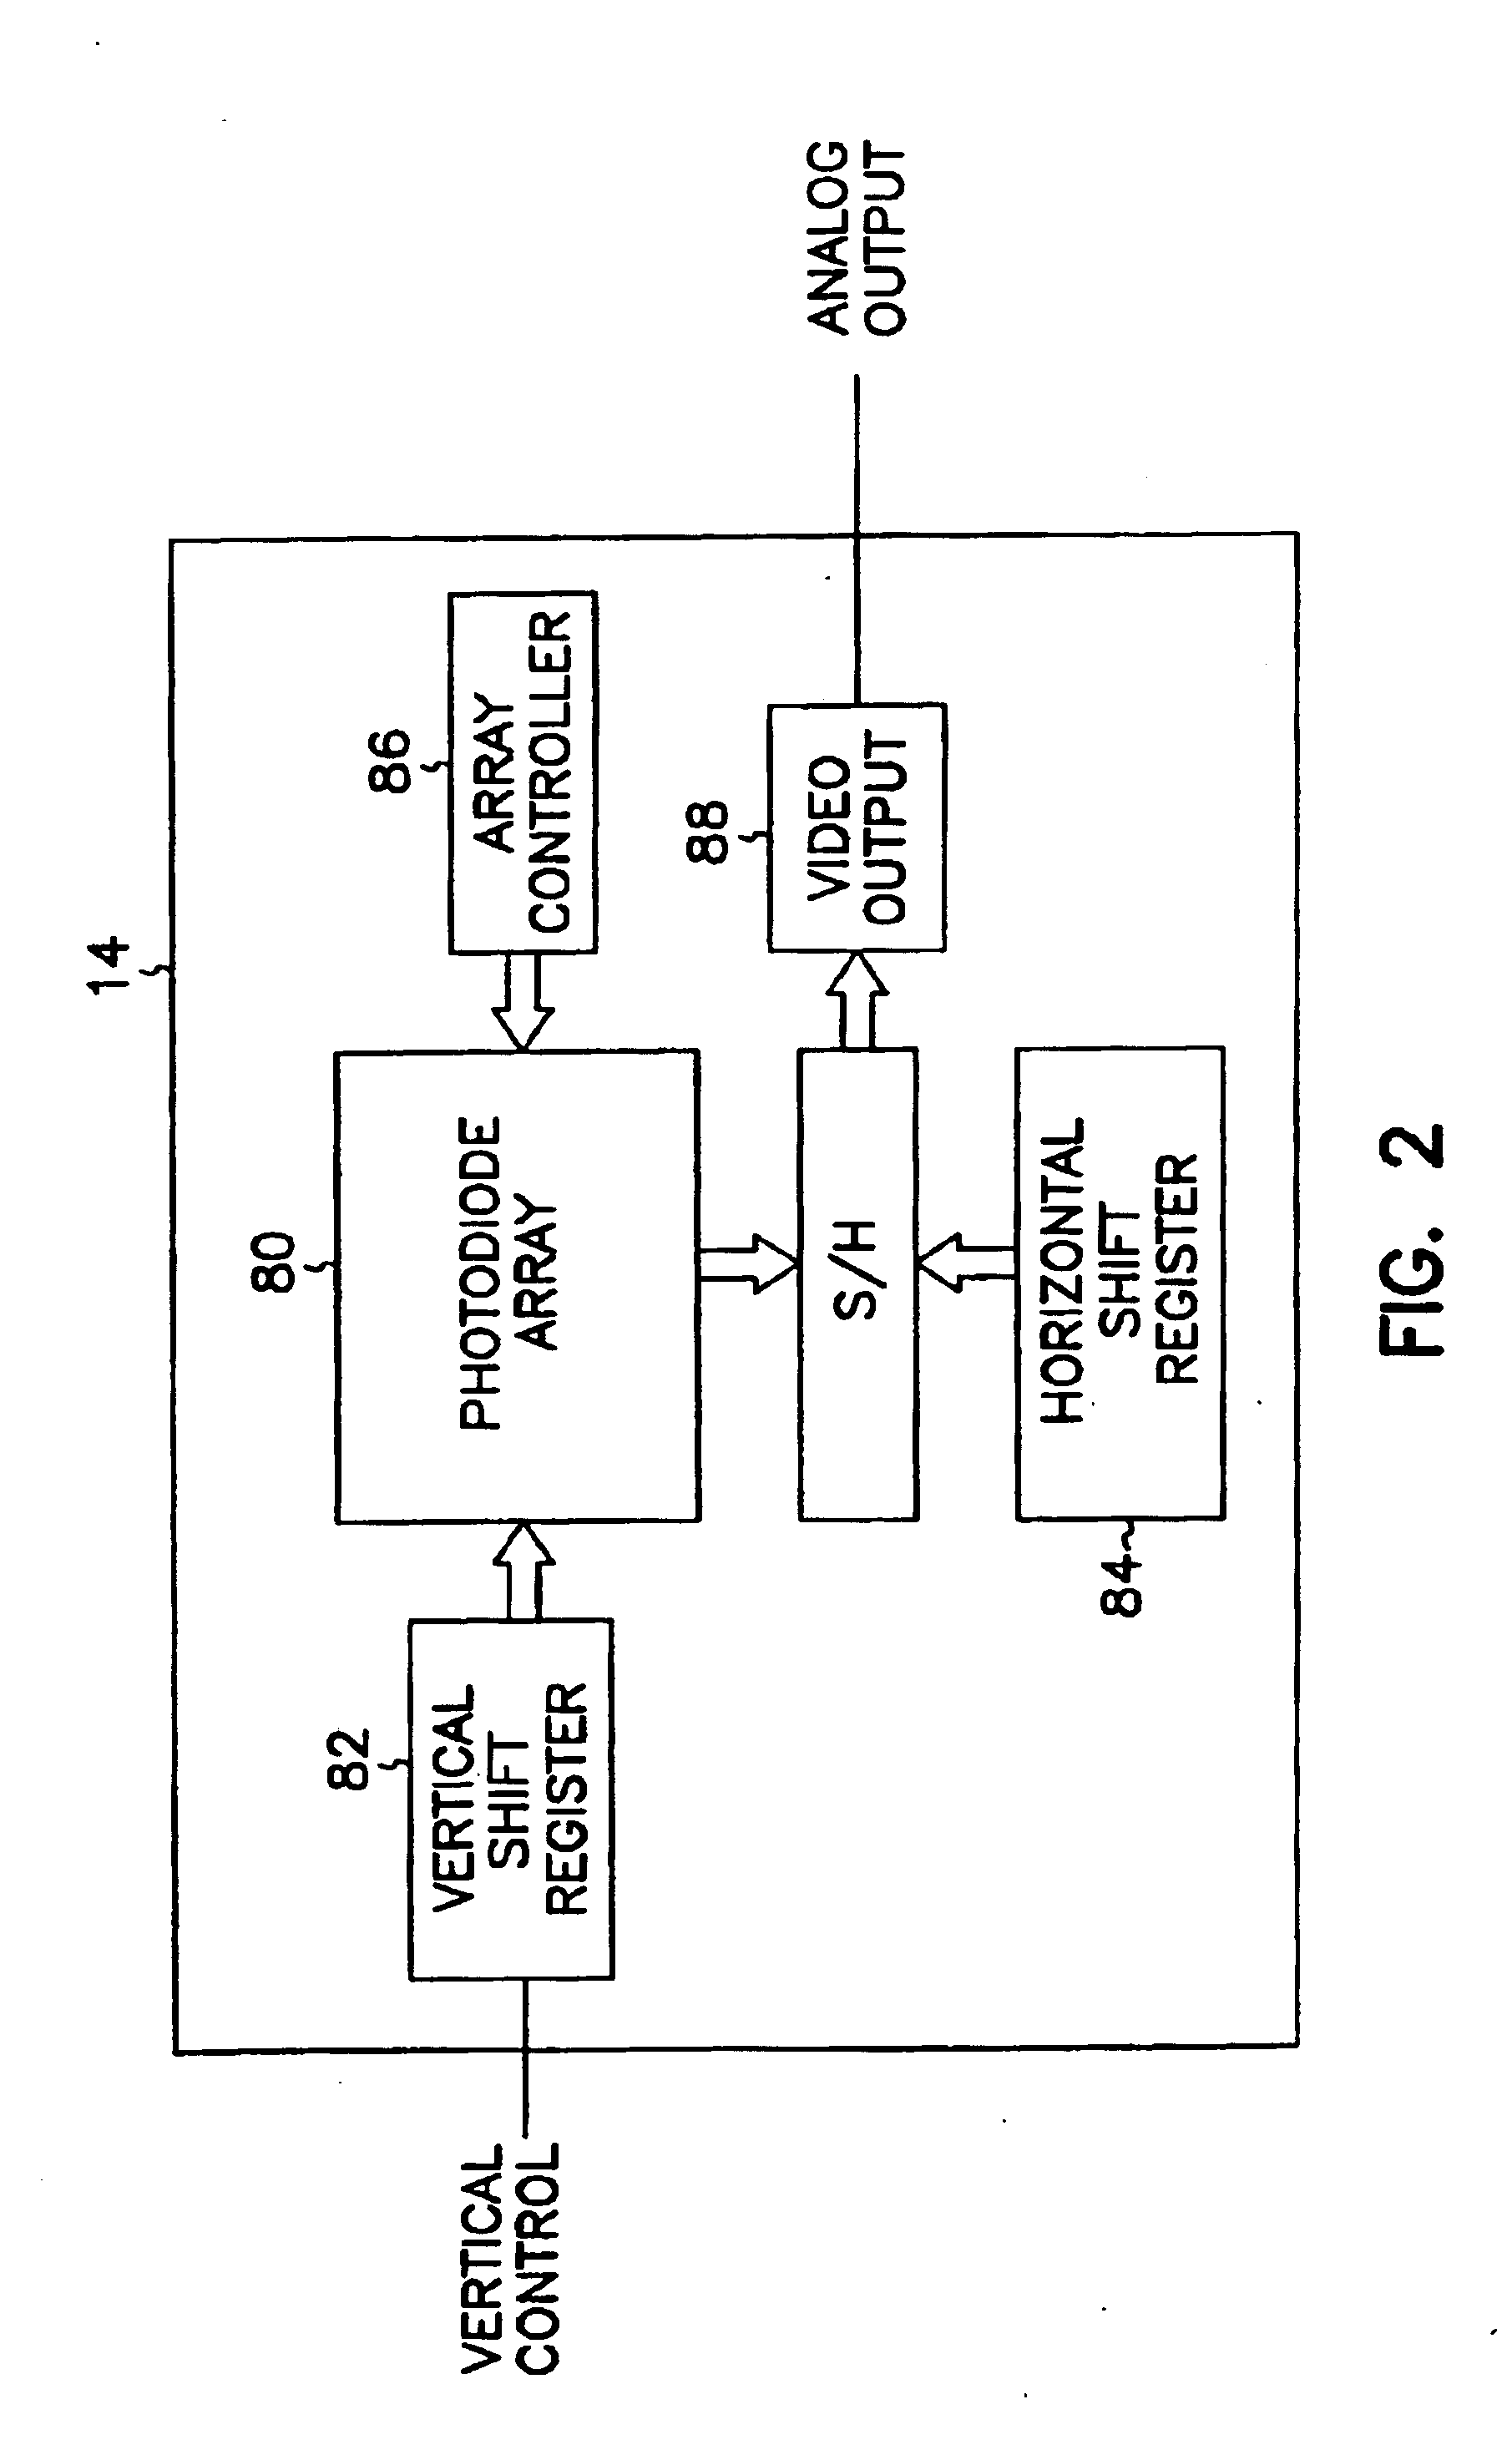 CMOS imager with integrated non-volatile memory